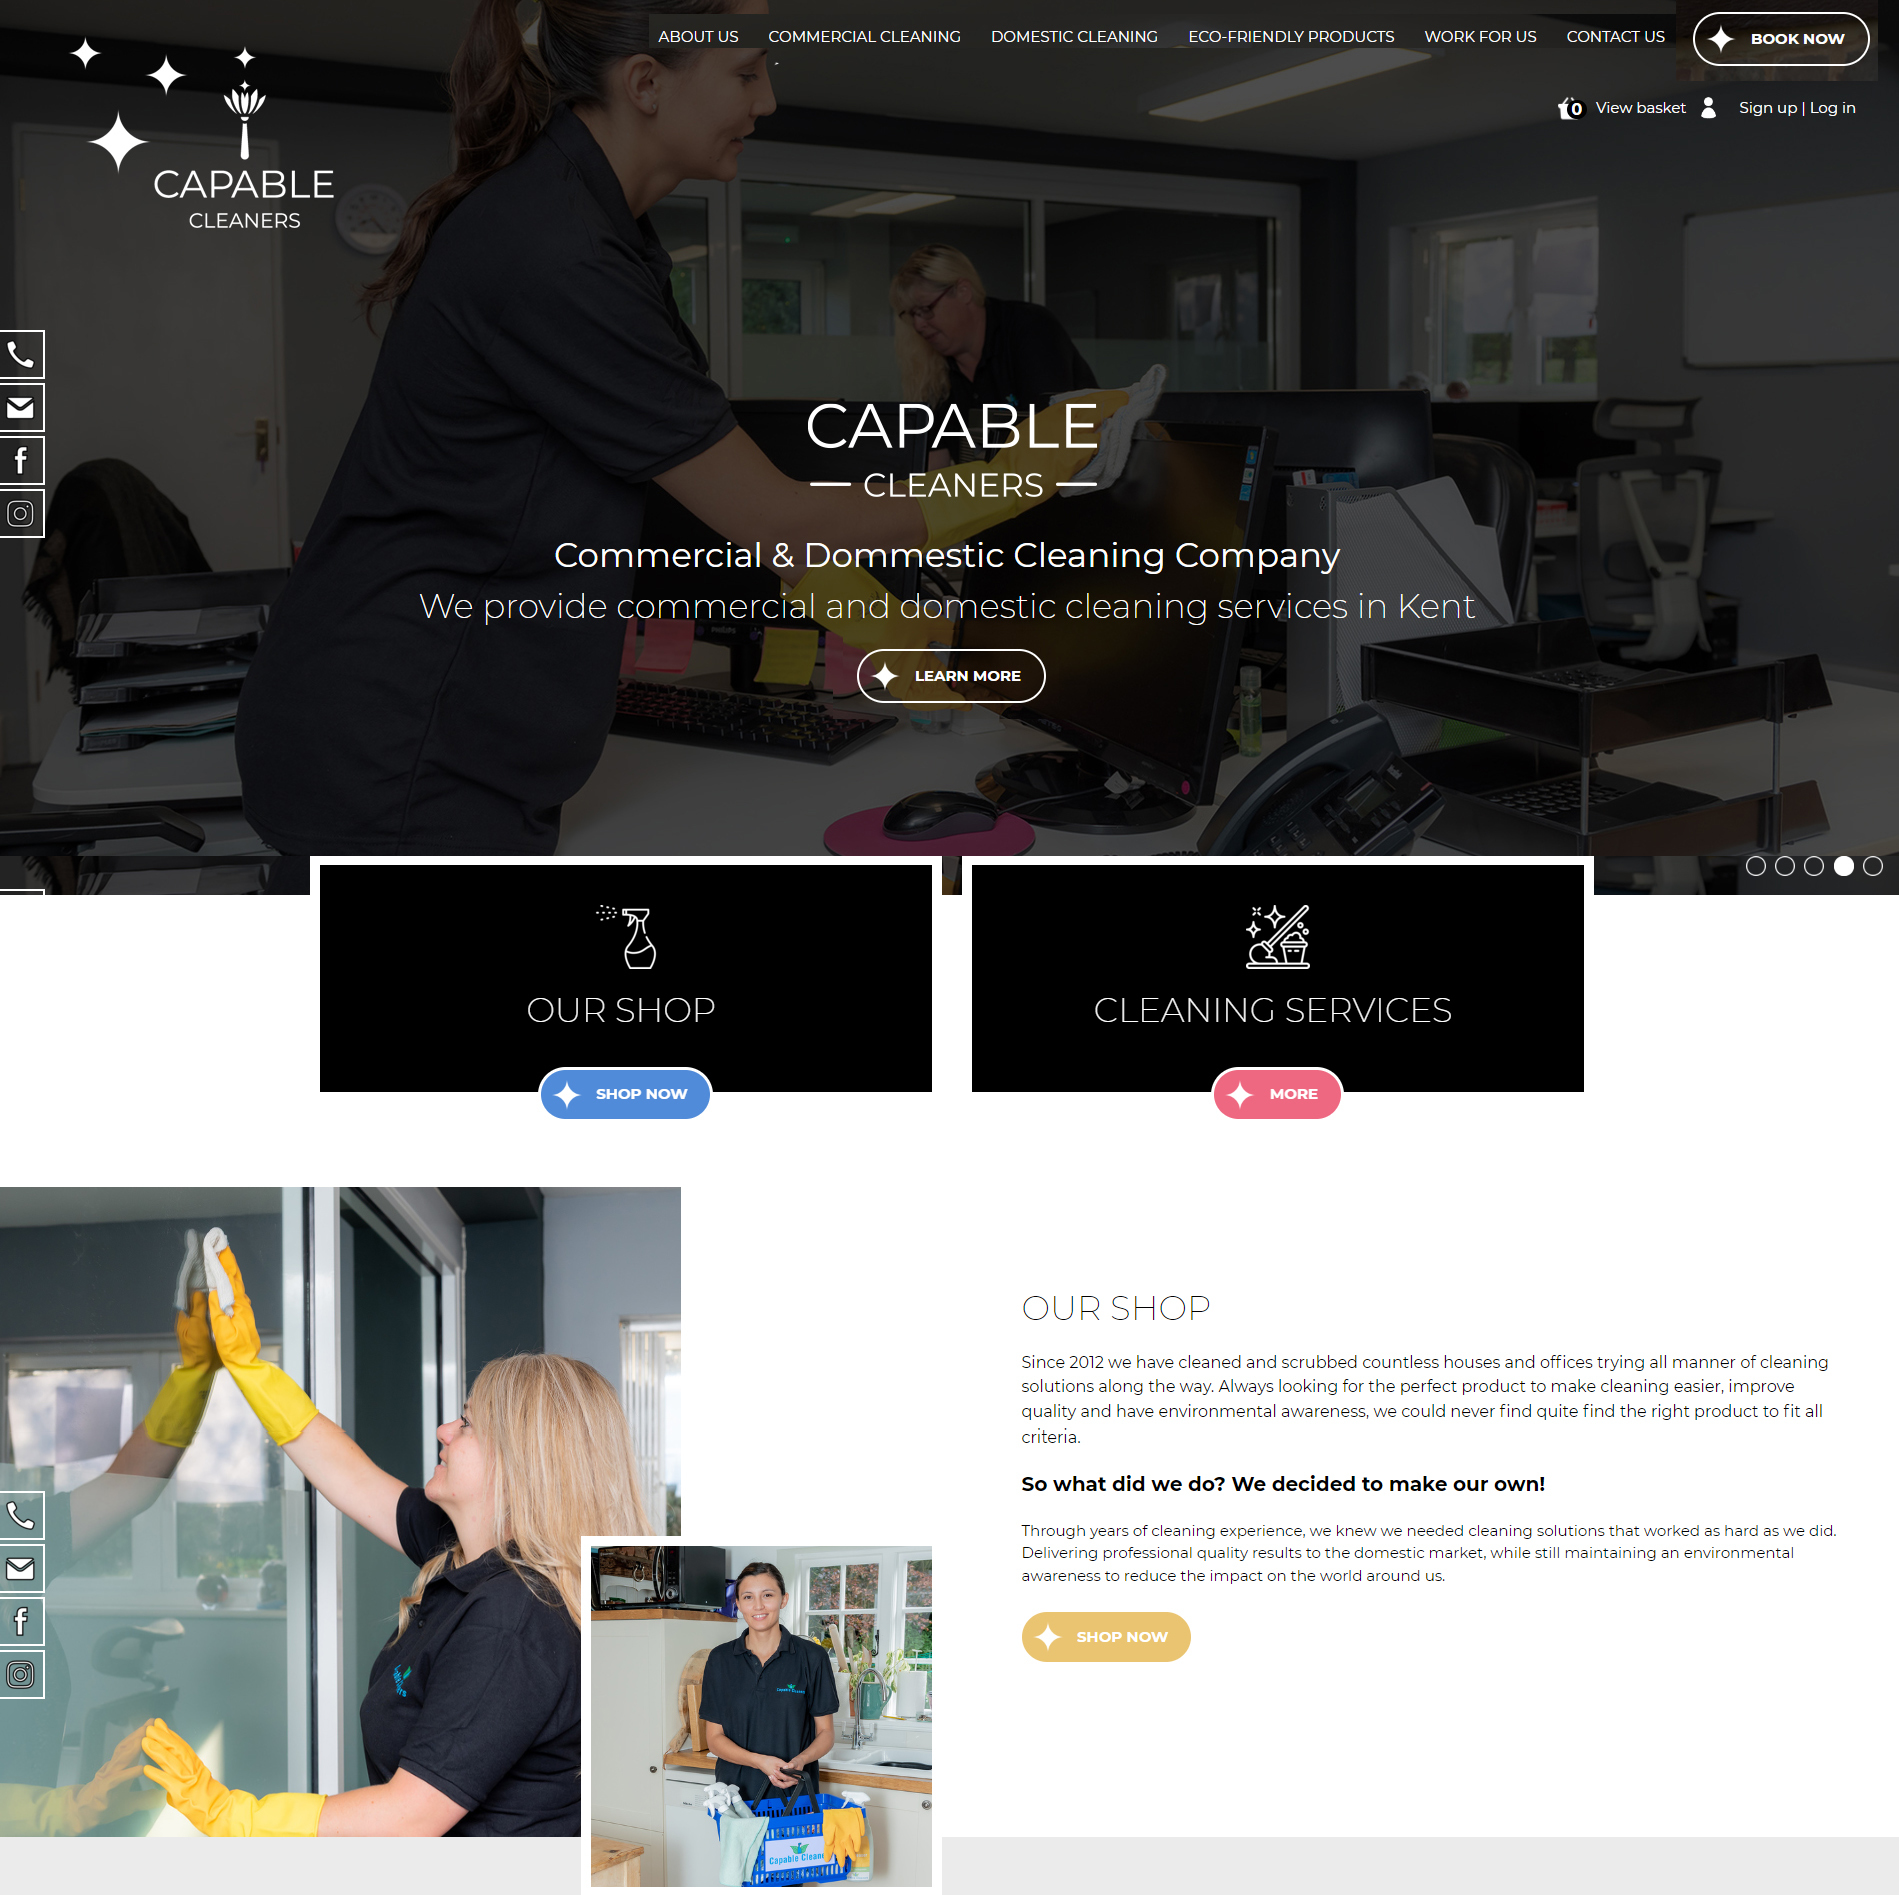 Capable cleaners screenshot of their website